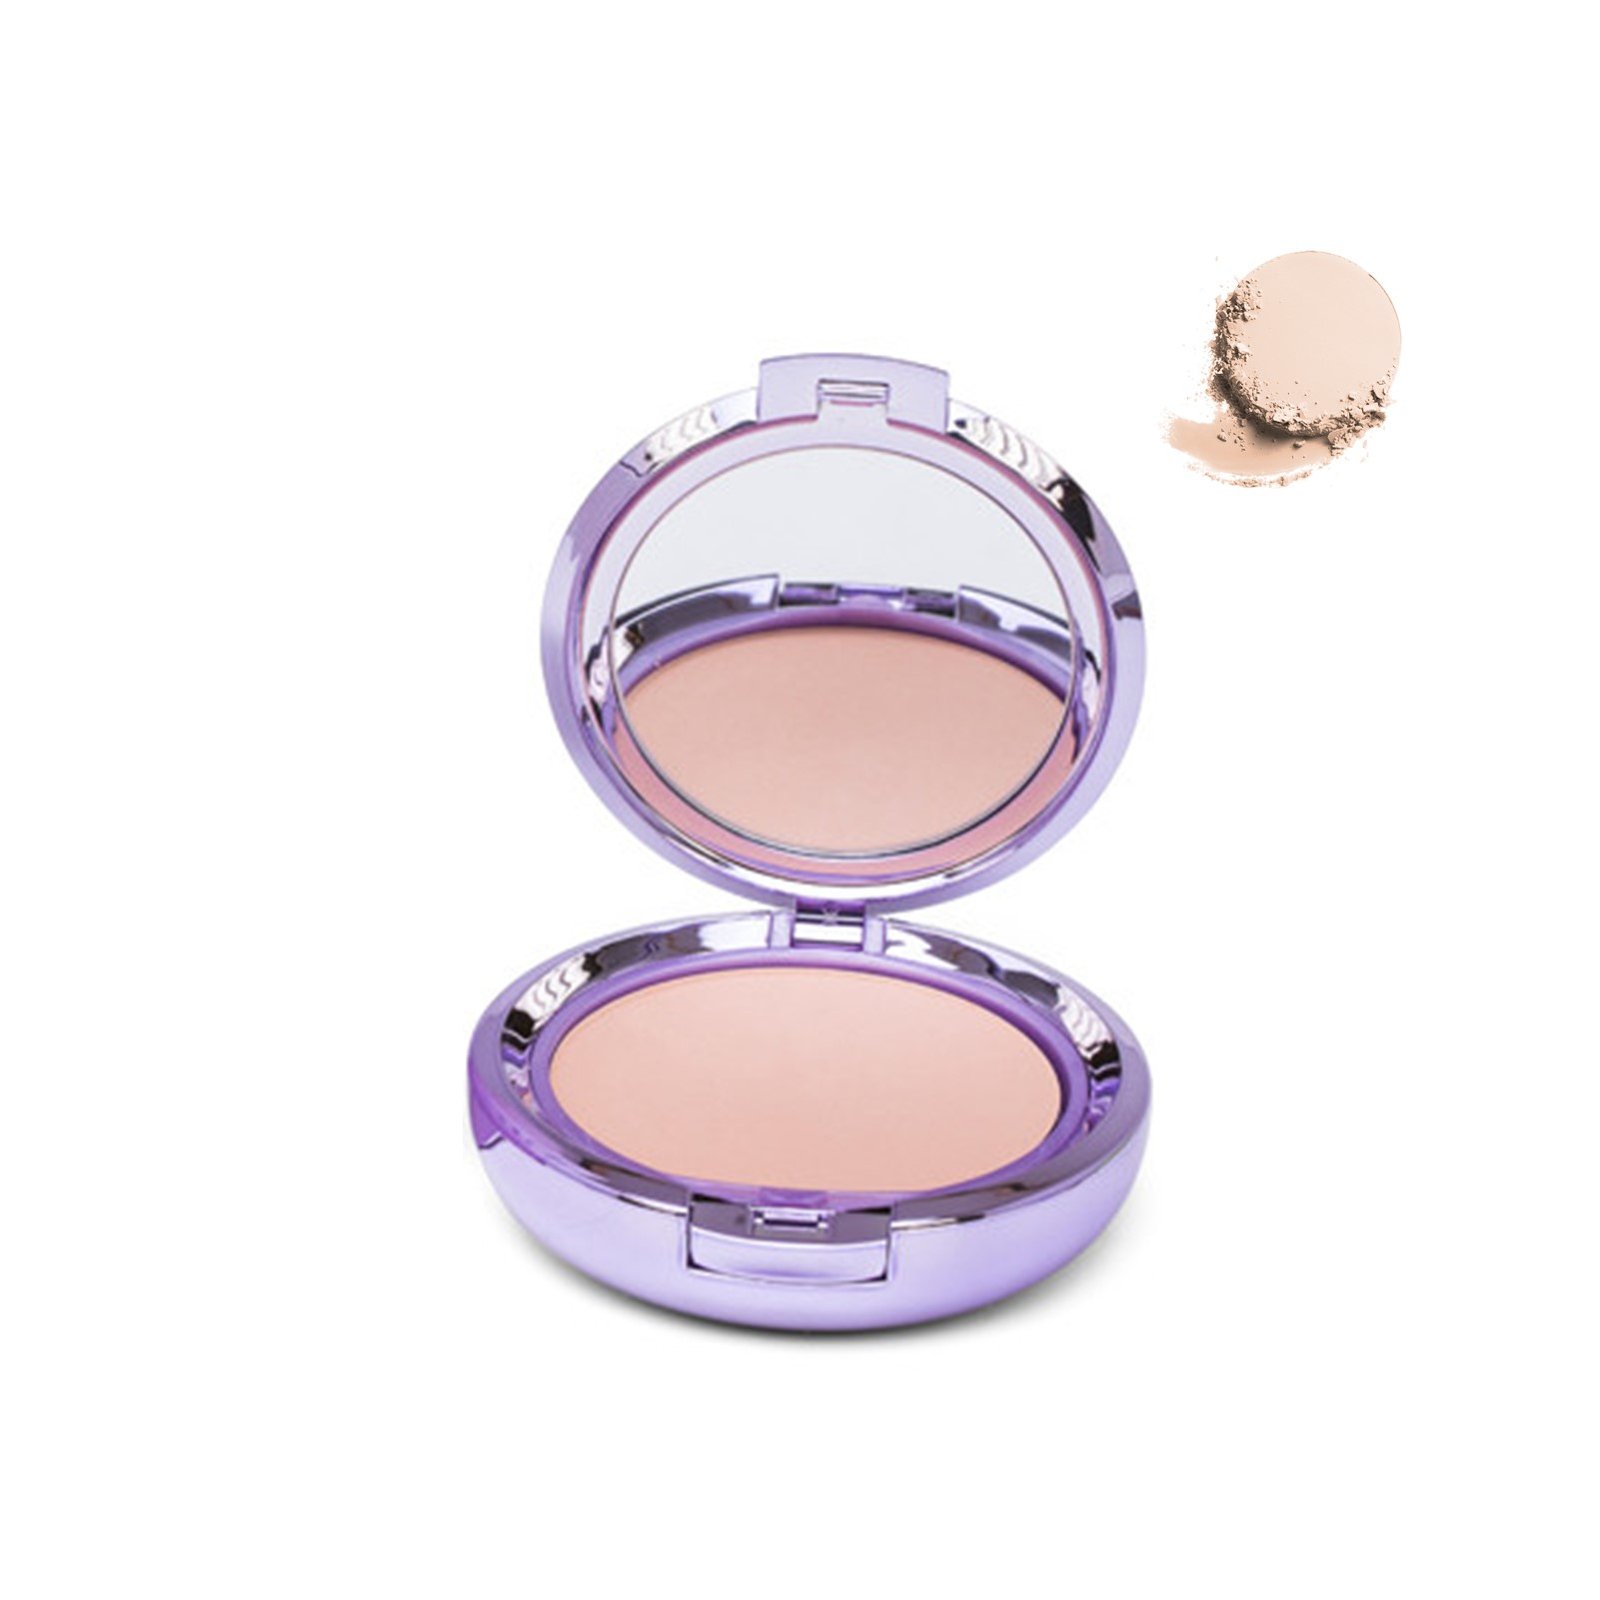 Covermark Compact Powder Oily-Acneic Skin 1 10g (0.35 oz)